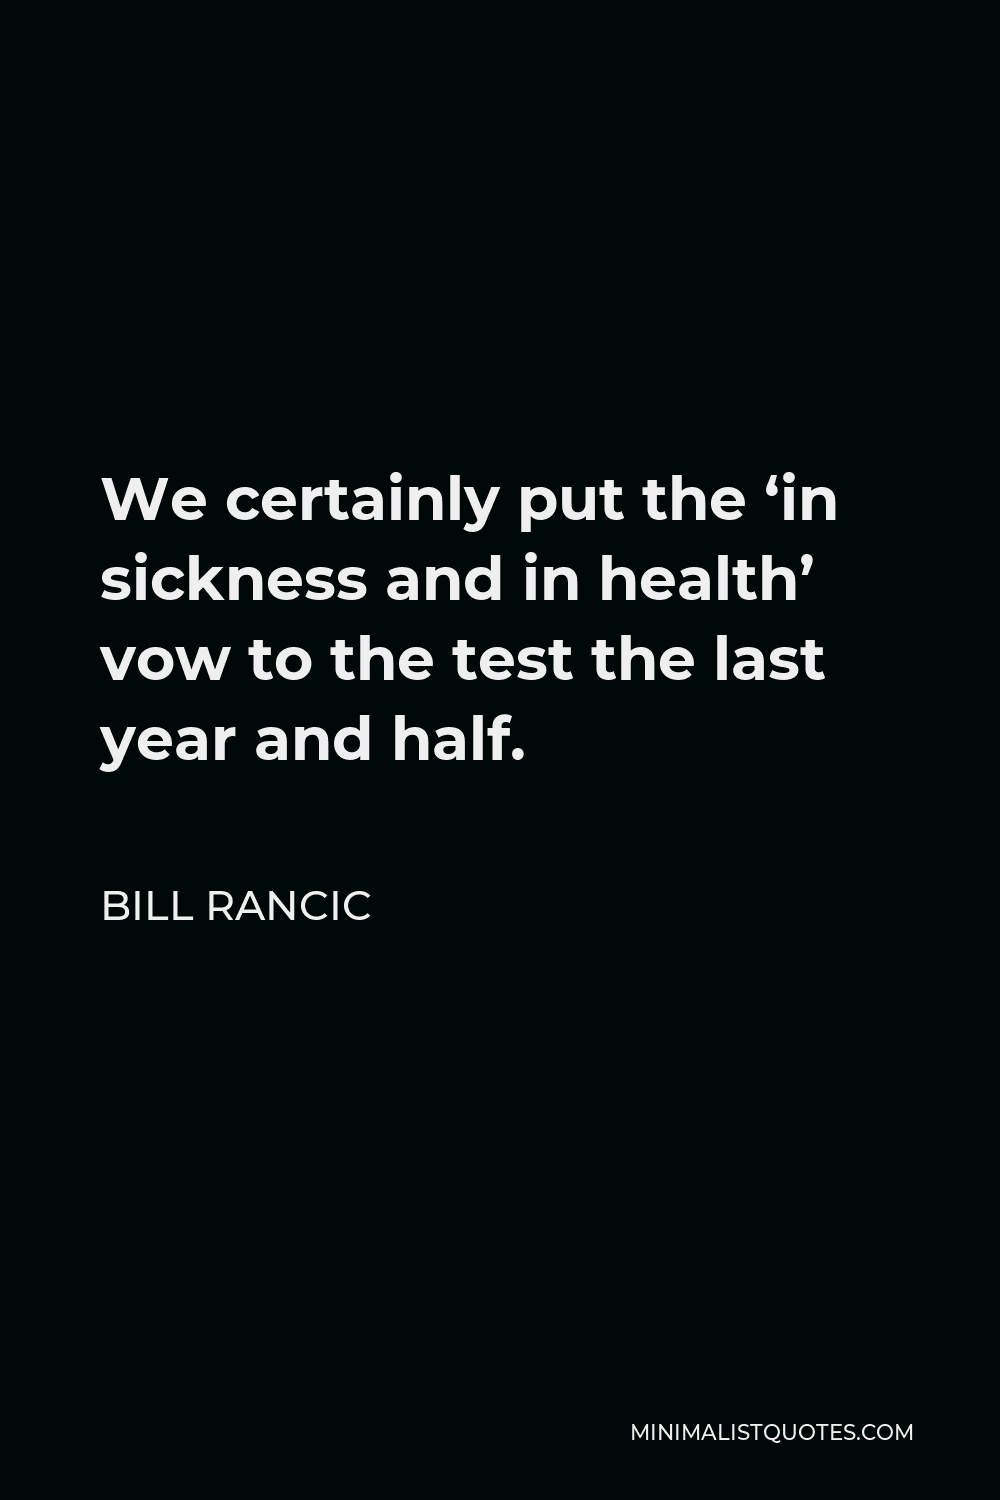 Bill Rancic Quote - We certainly put the ‘in sickness and in health’ vow to the test the last year and half.